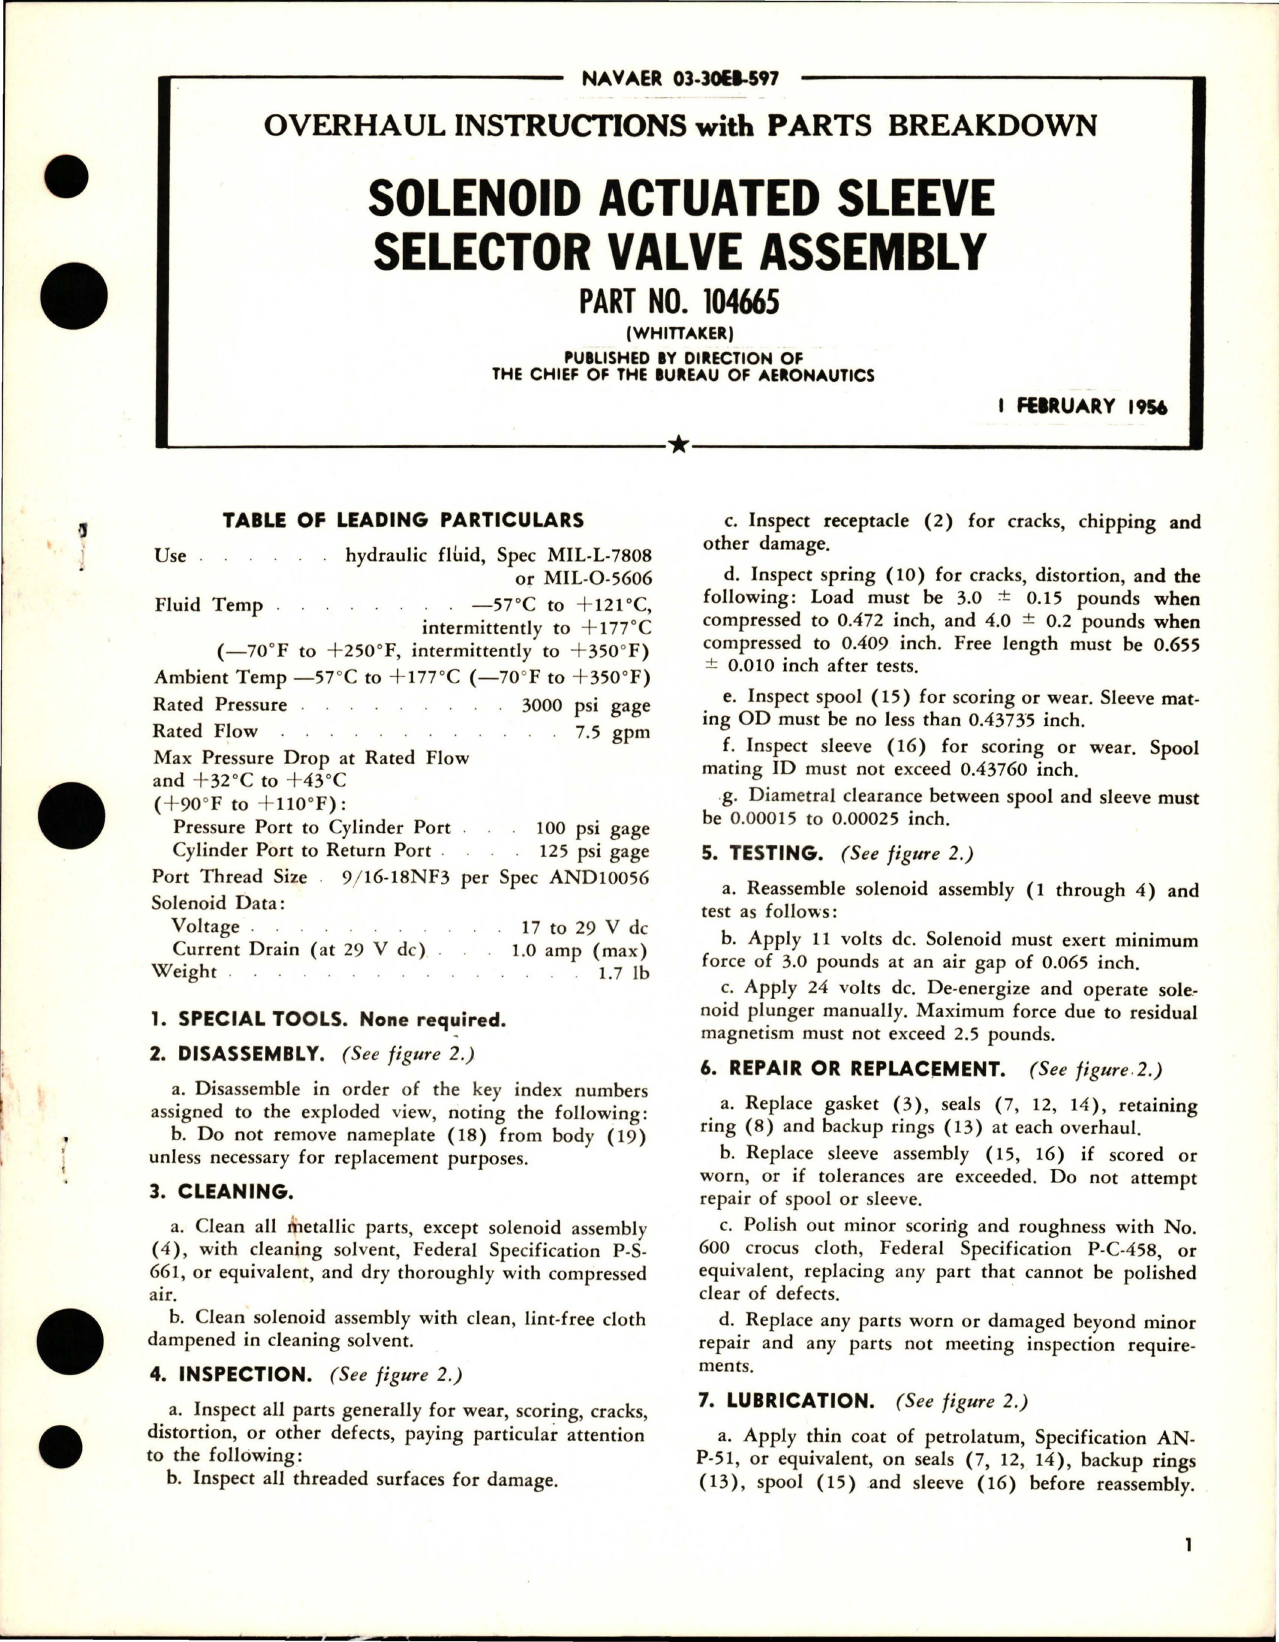 Sample page 1 from AirCorps Library document: Overhaul Instructions with Parts Breakdown for Solenoid Actuated Sleeve Selector Valve Assembly - Part 104665